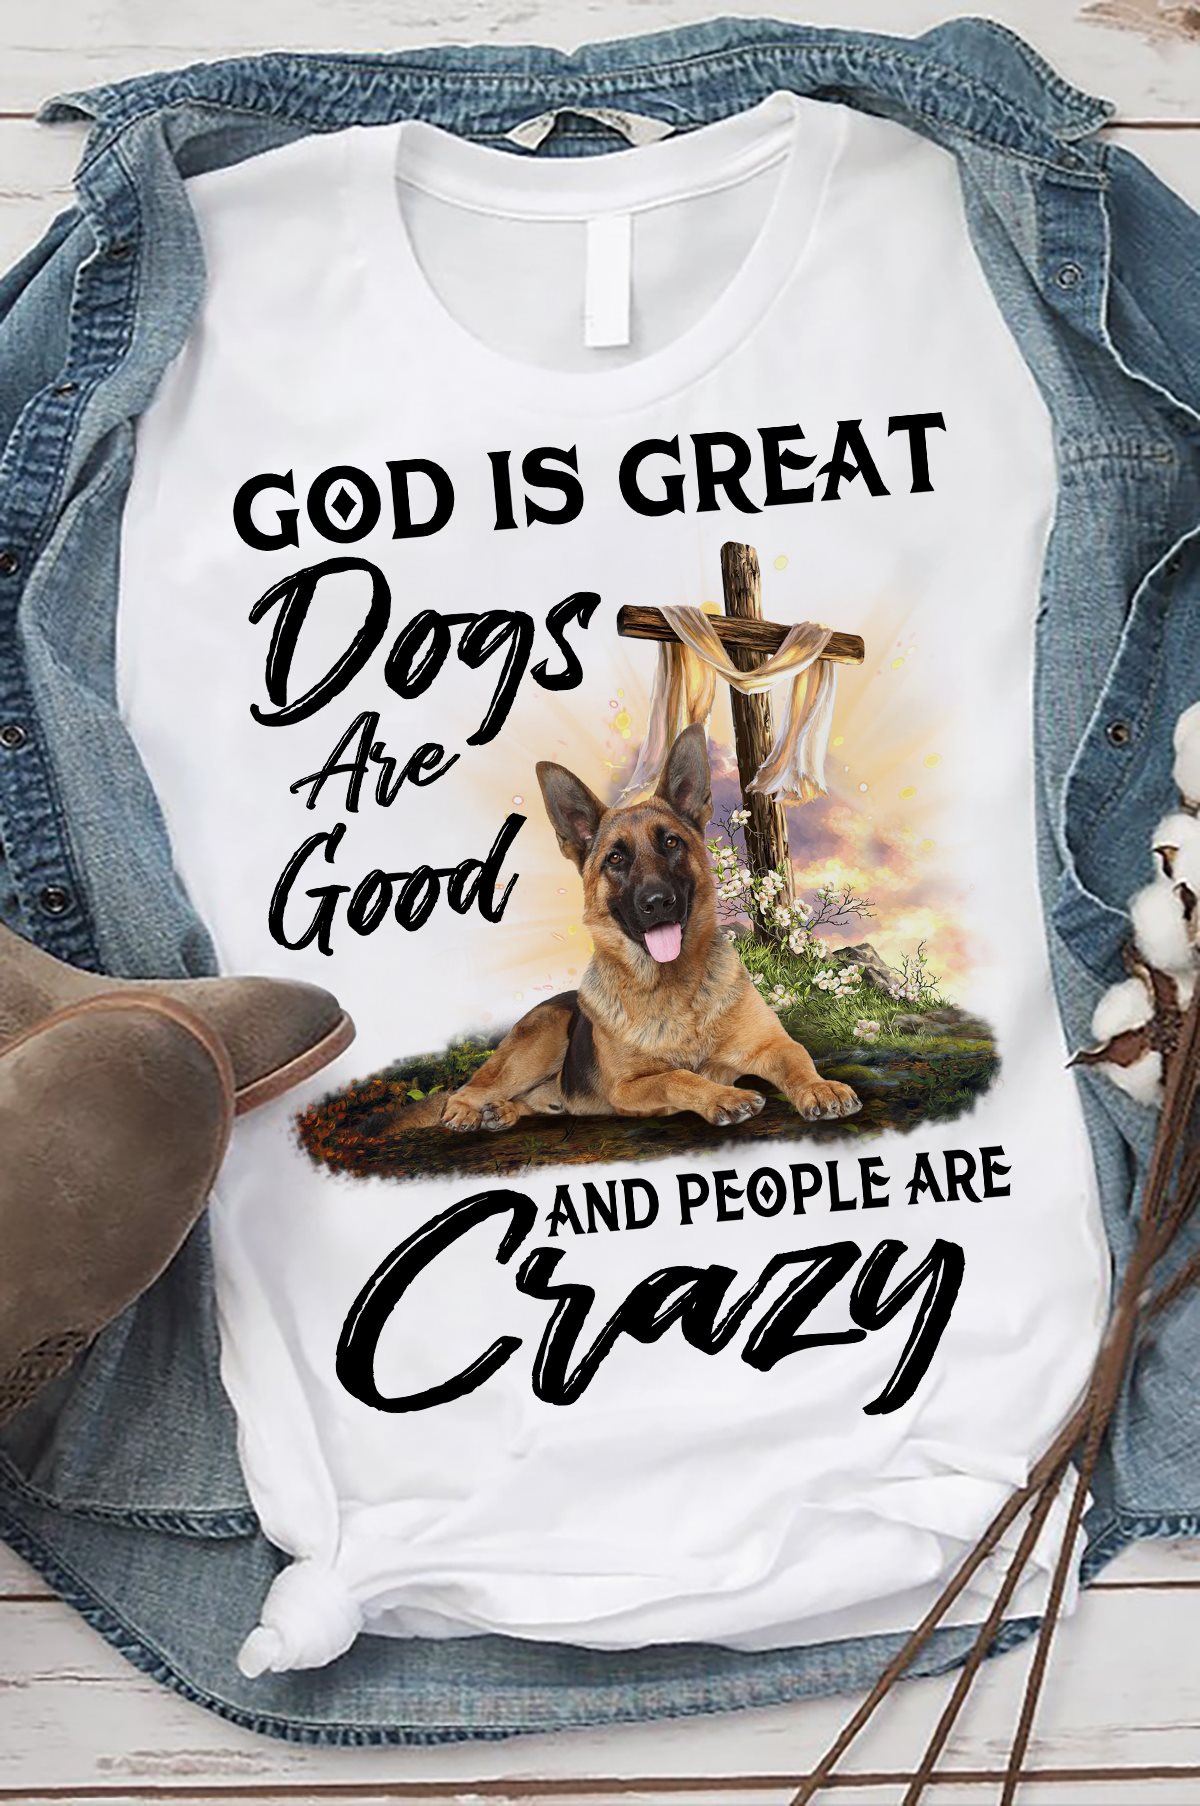 God is great dogs are good and people are crazy - German shepherd dog